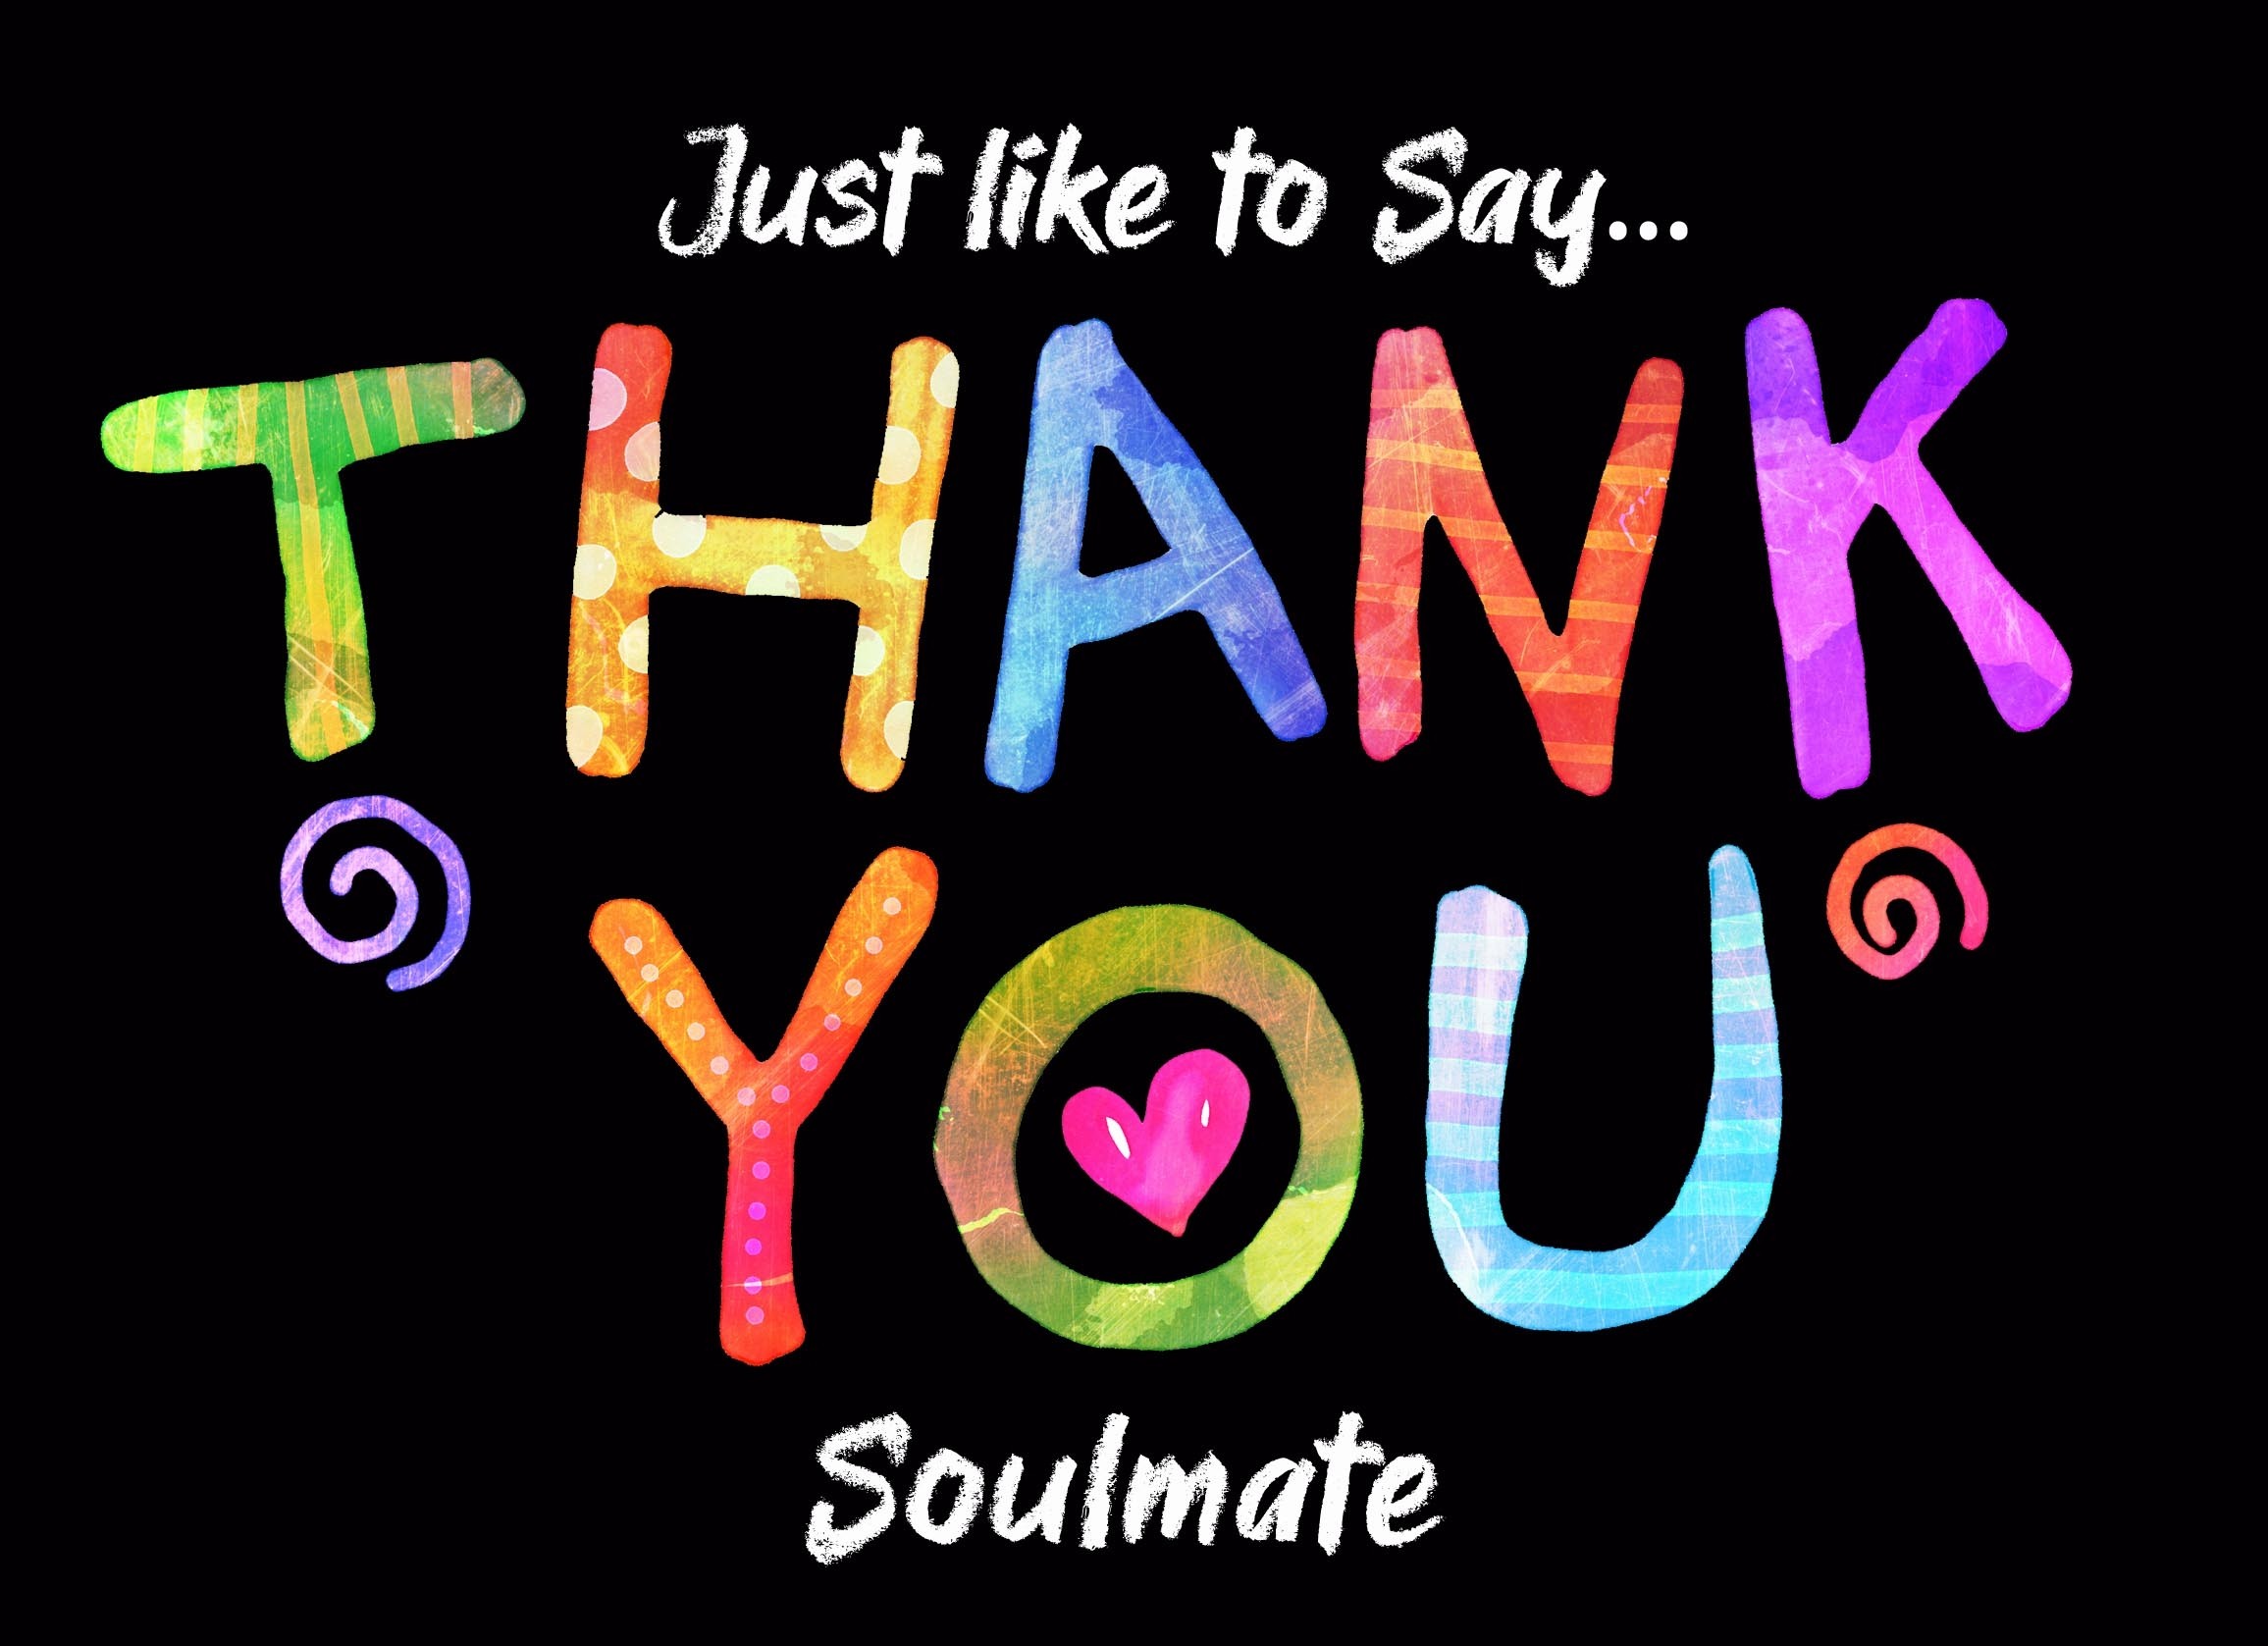 Thank You 'Soulmate' Greeting Card